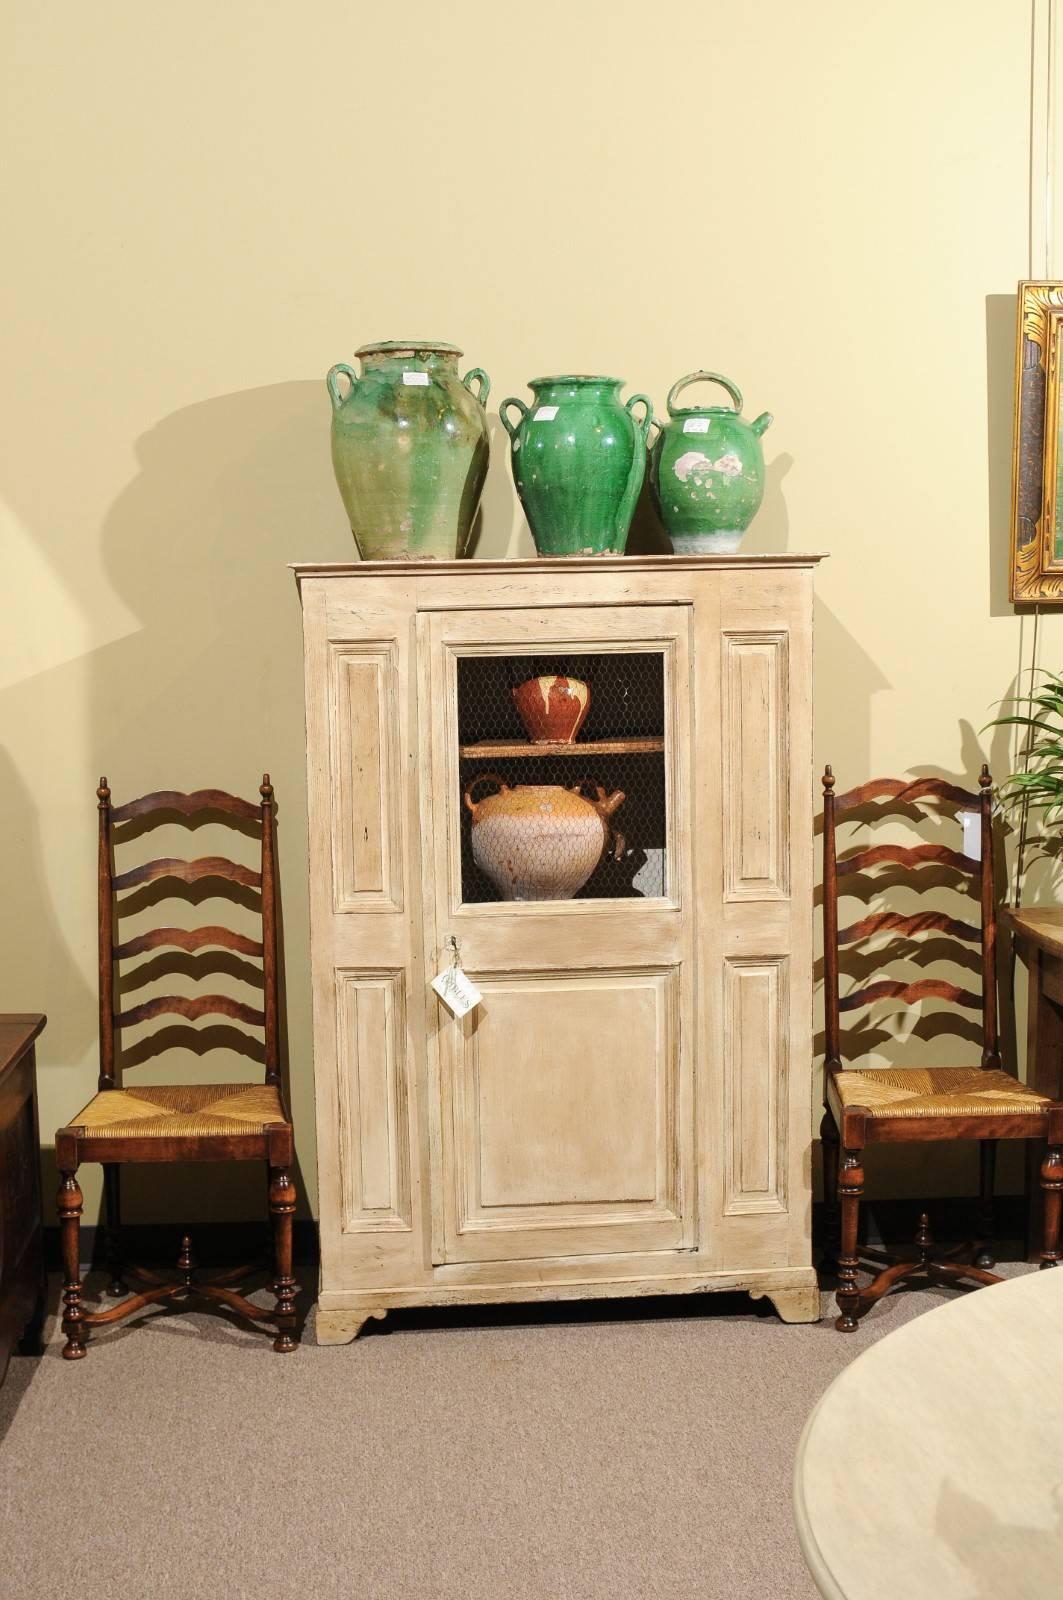 19th century painted cabinet from France.

This charming small cabinet would be ideal for use in a kitchen, bathroom or a child's room. In spite of its small size, it provides ample storage for any number of things without taking up too much room.